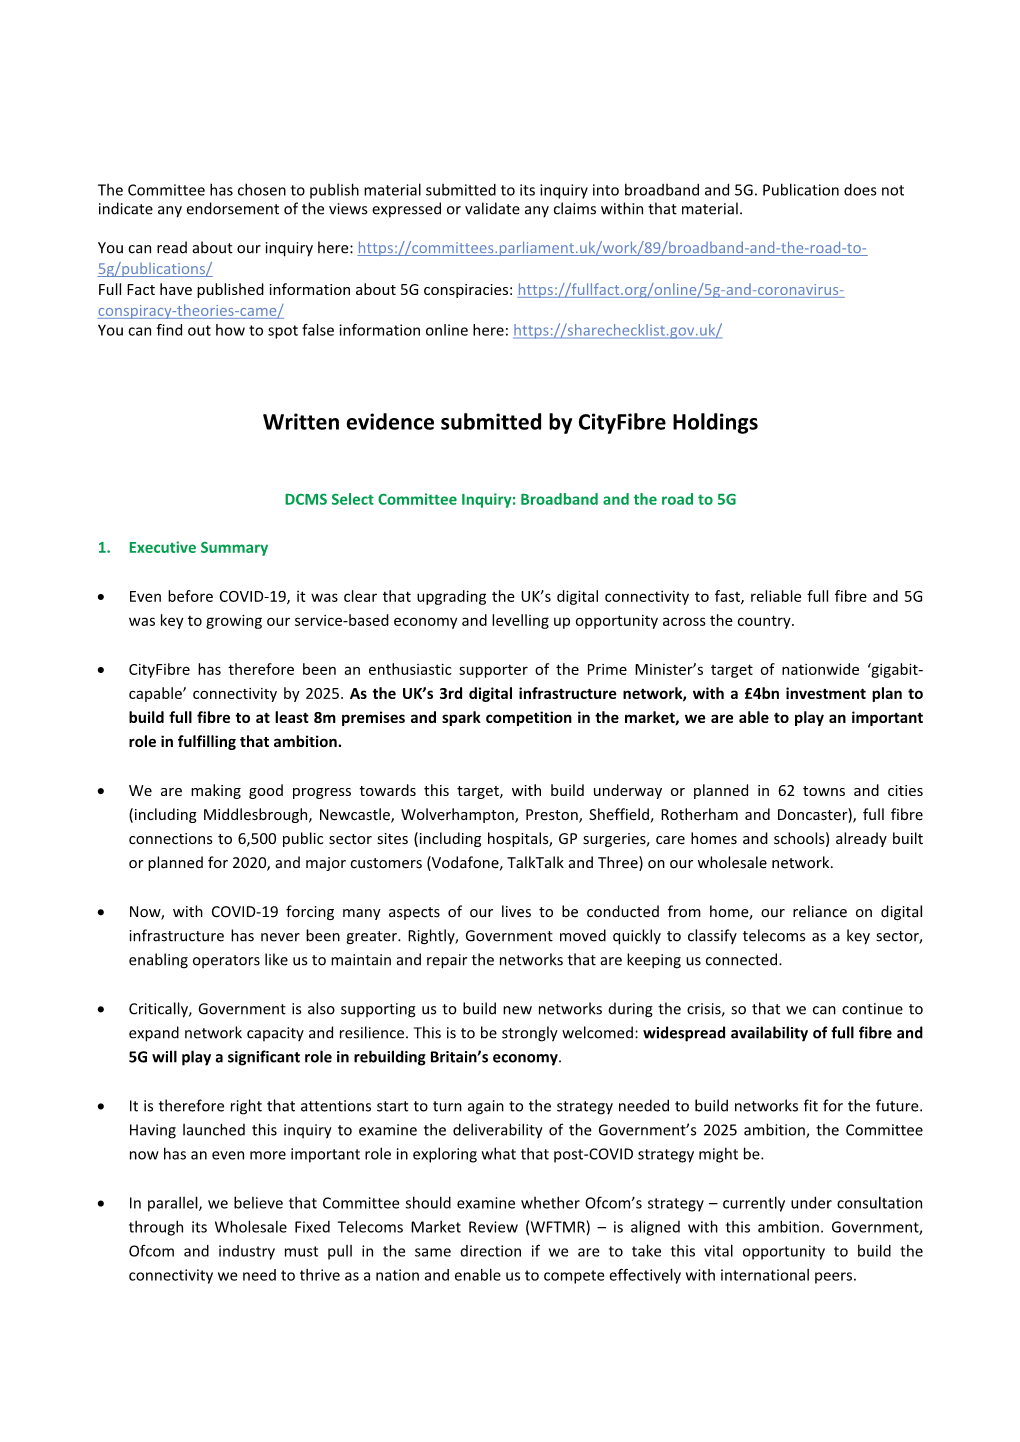 Written Evidence Submitted by Cityfibre Holdings